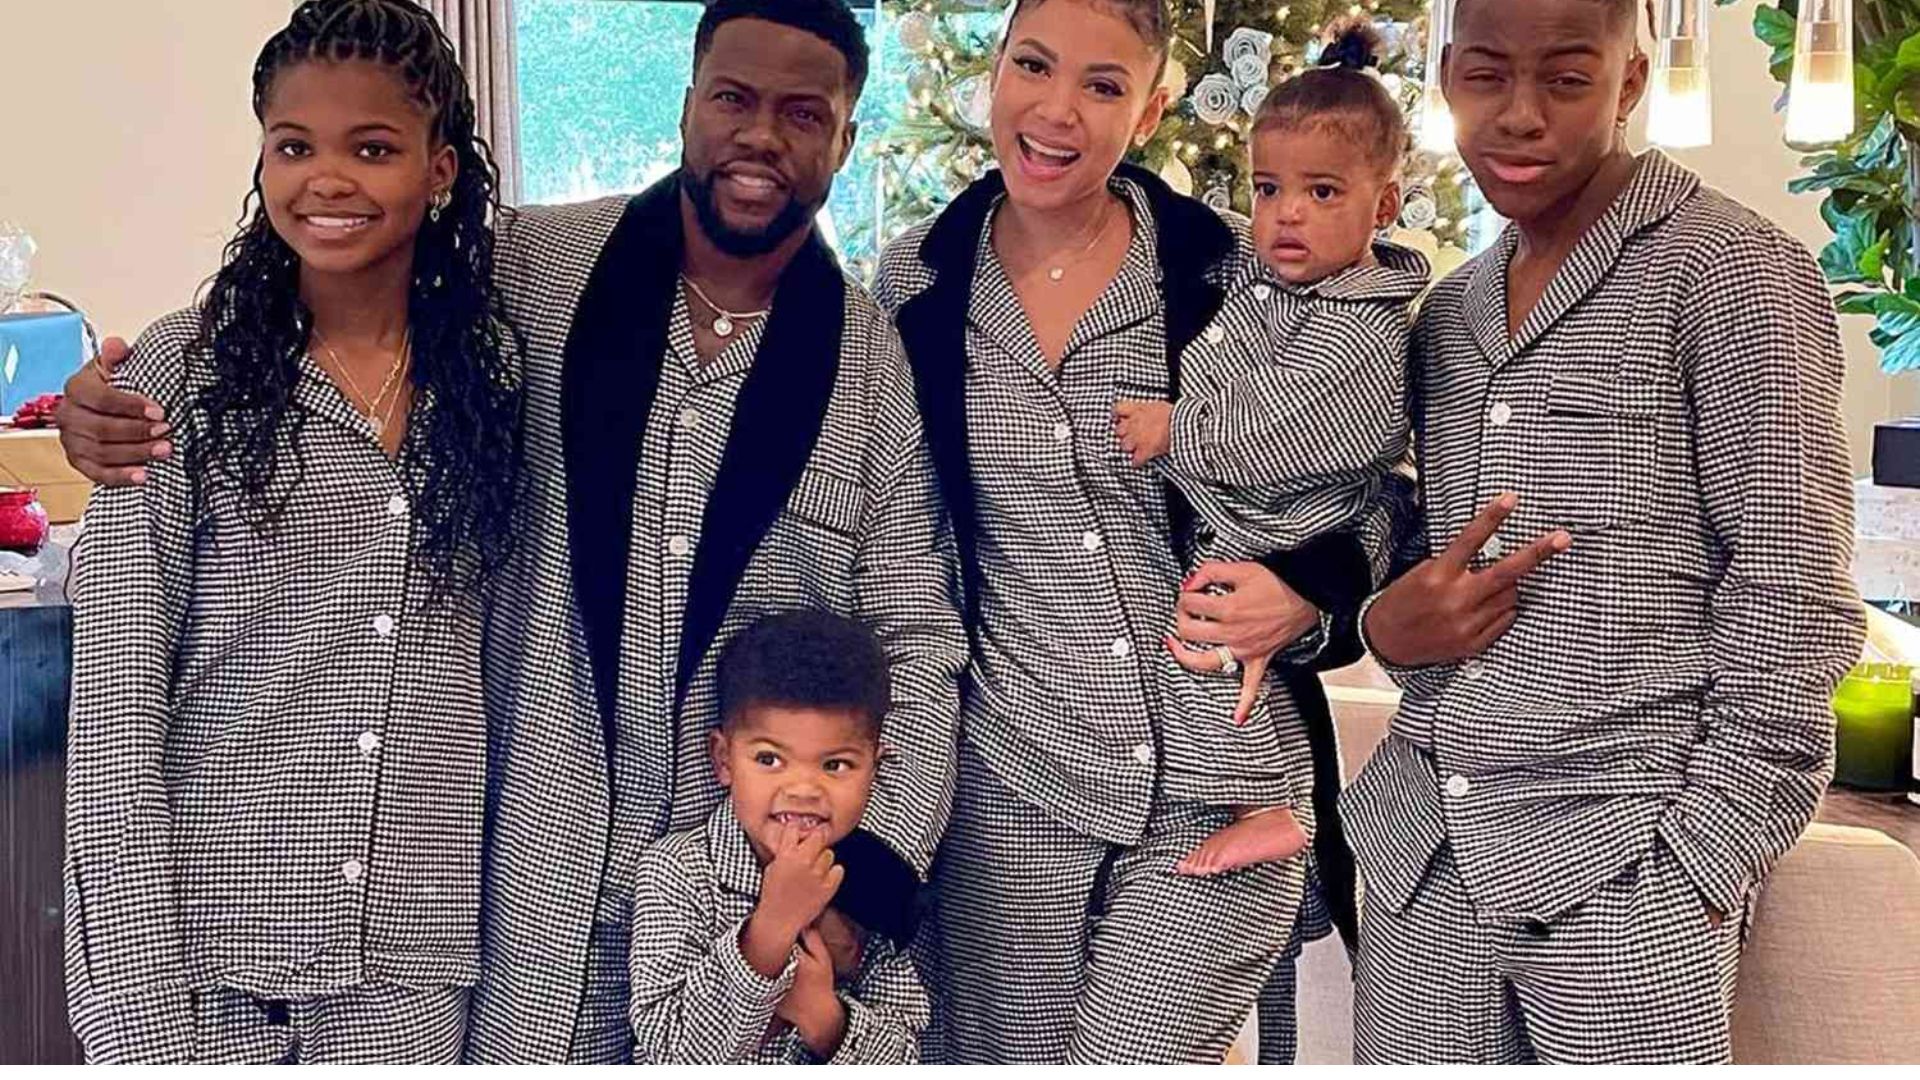 Kevin Hart With His Wife and Kids In Uniform Pajamas